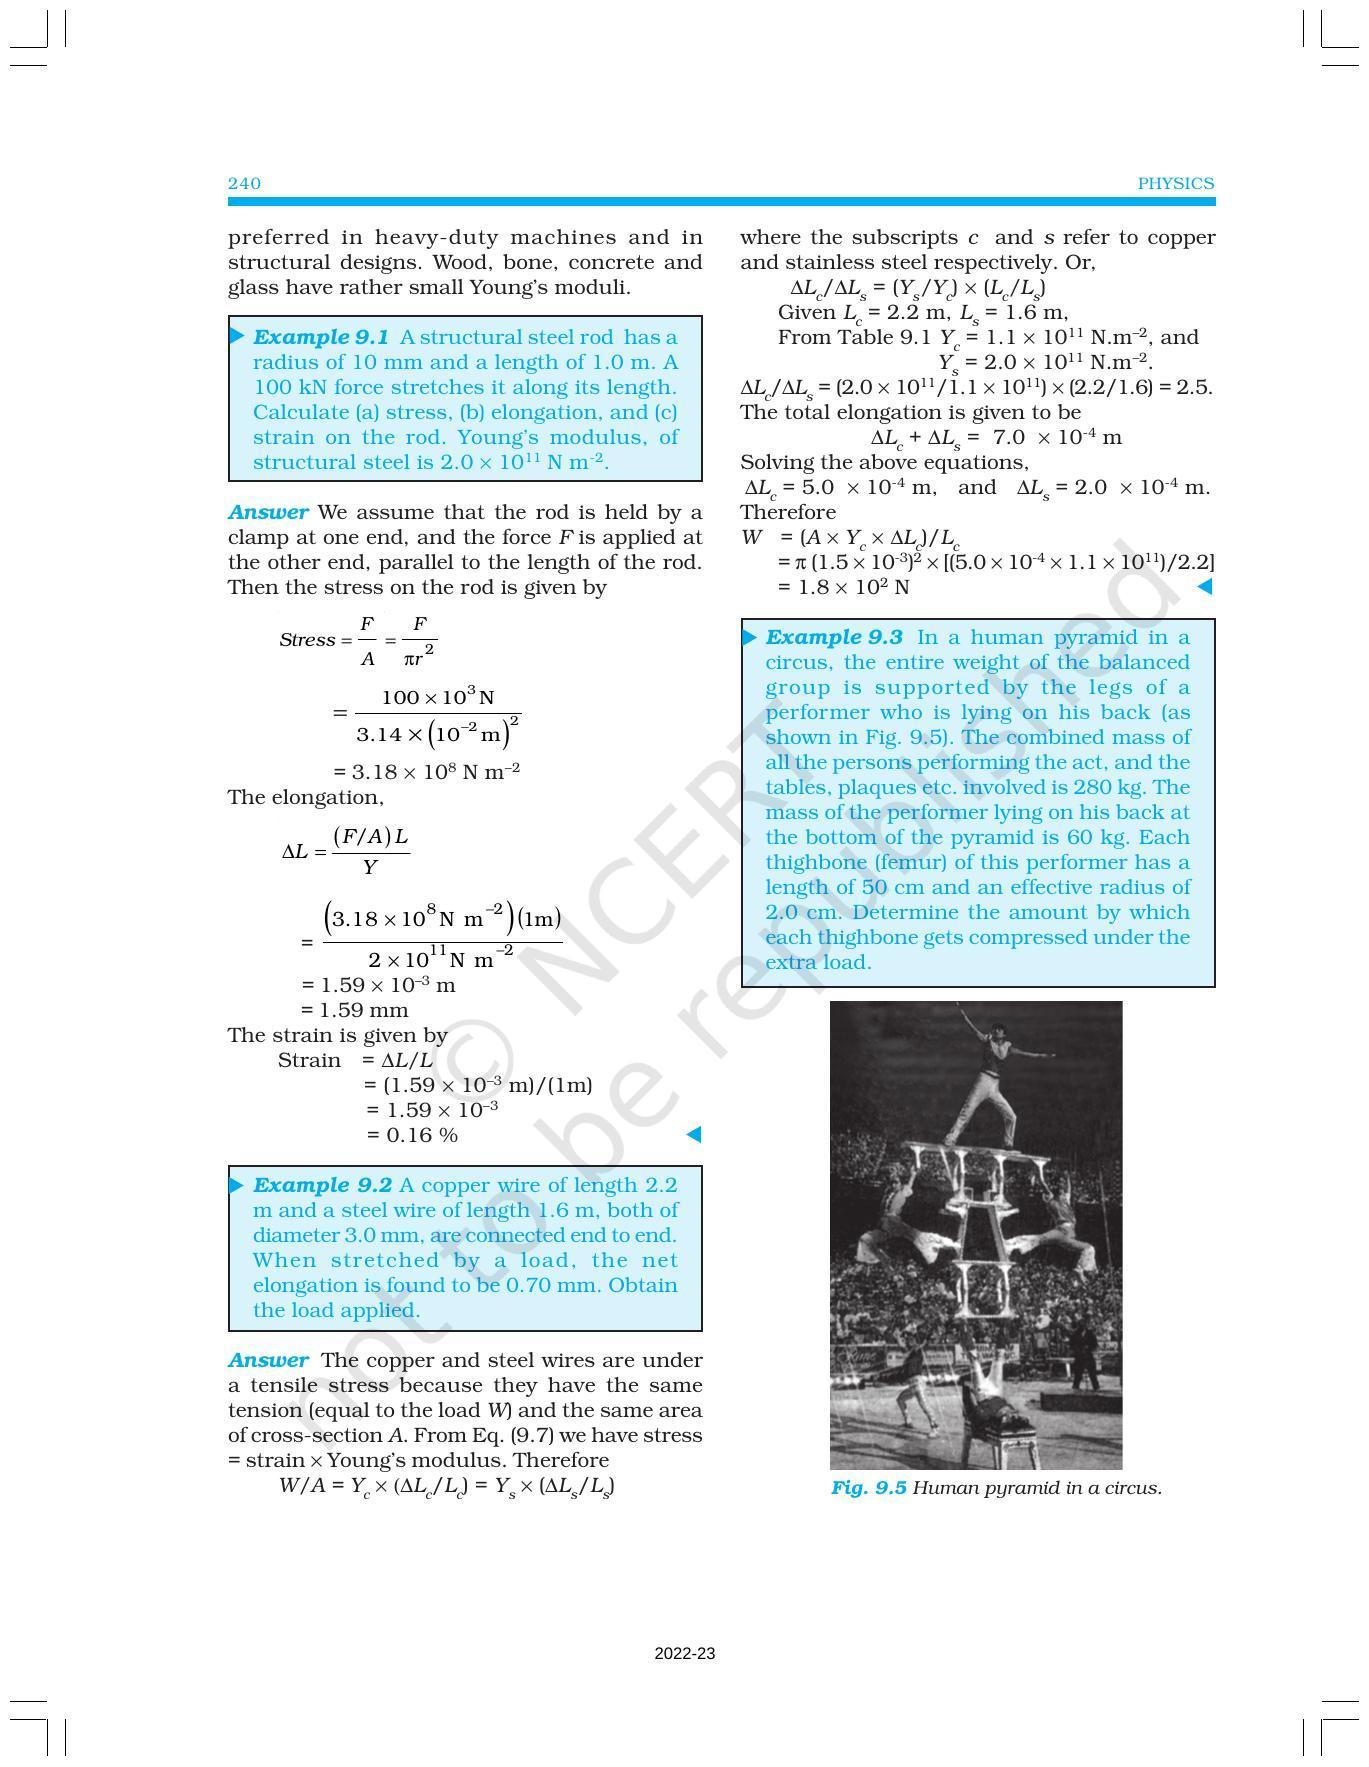 NCERT Book for Class 11 Physics Chapter 9 Mechanical Properties of Solids - Page 6